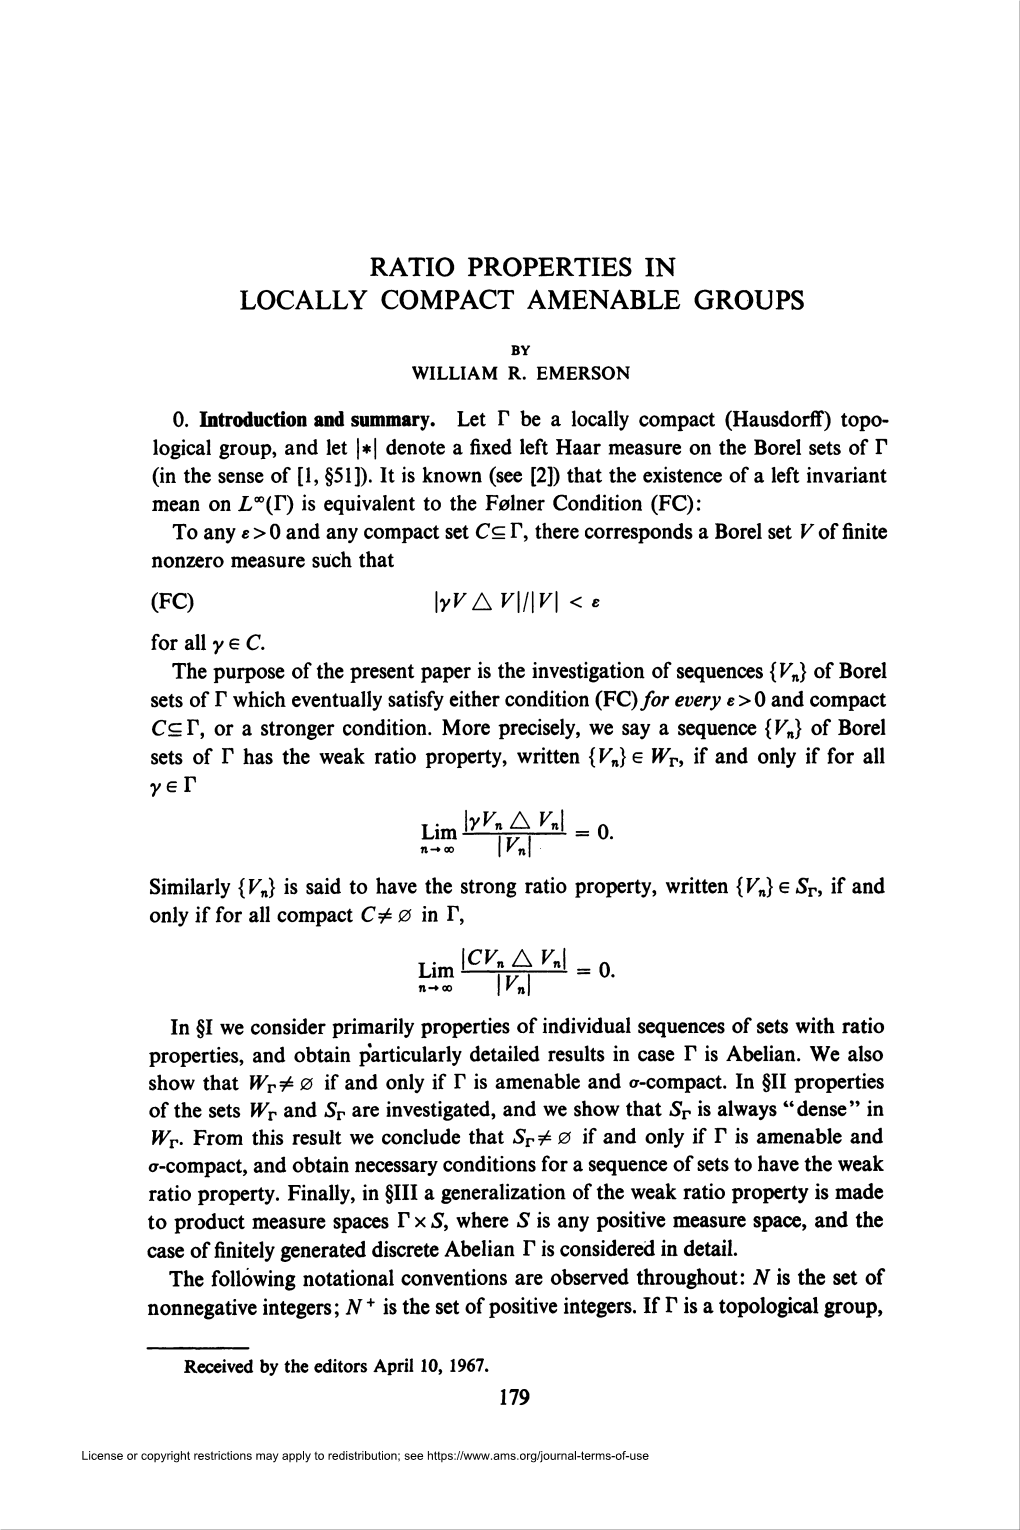 Ratio Properties in Locally Compact Amenable Groups